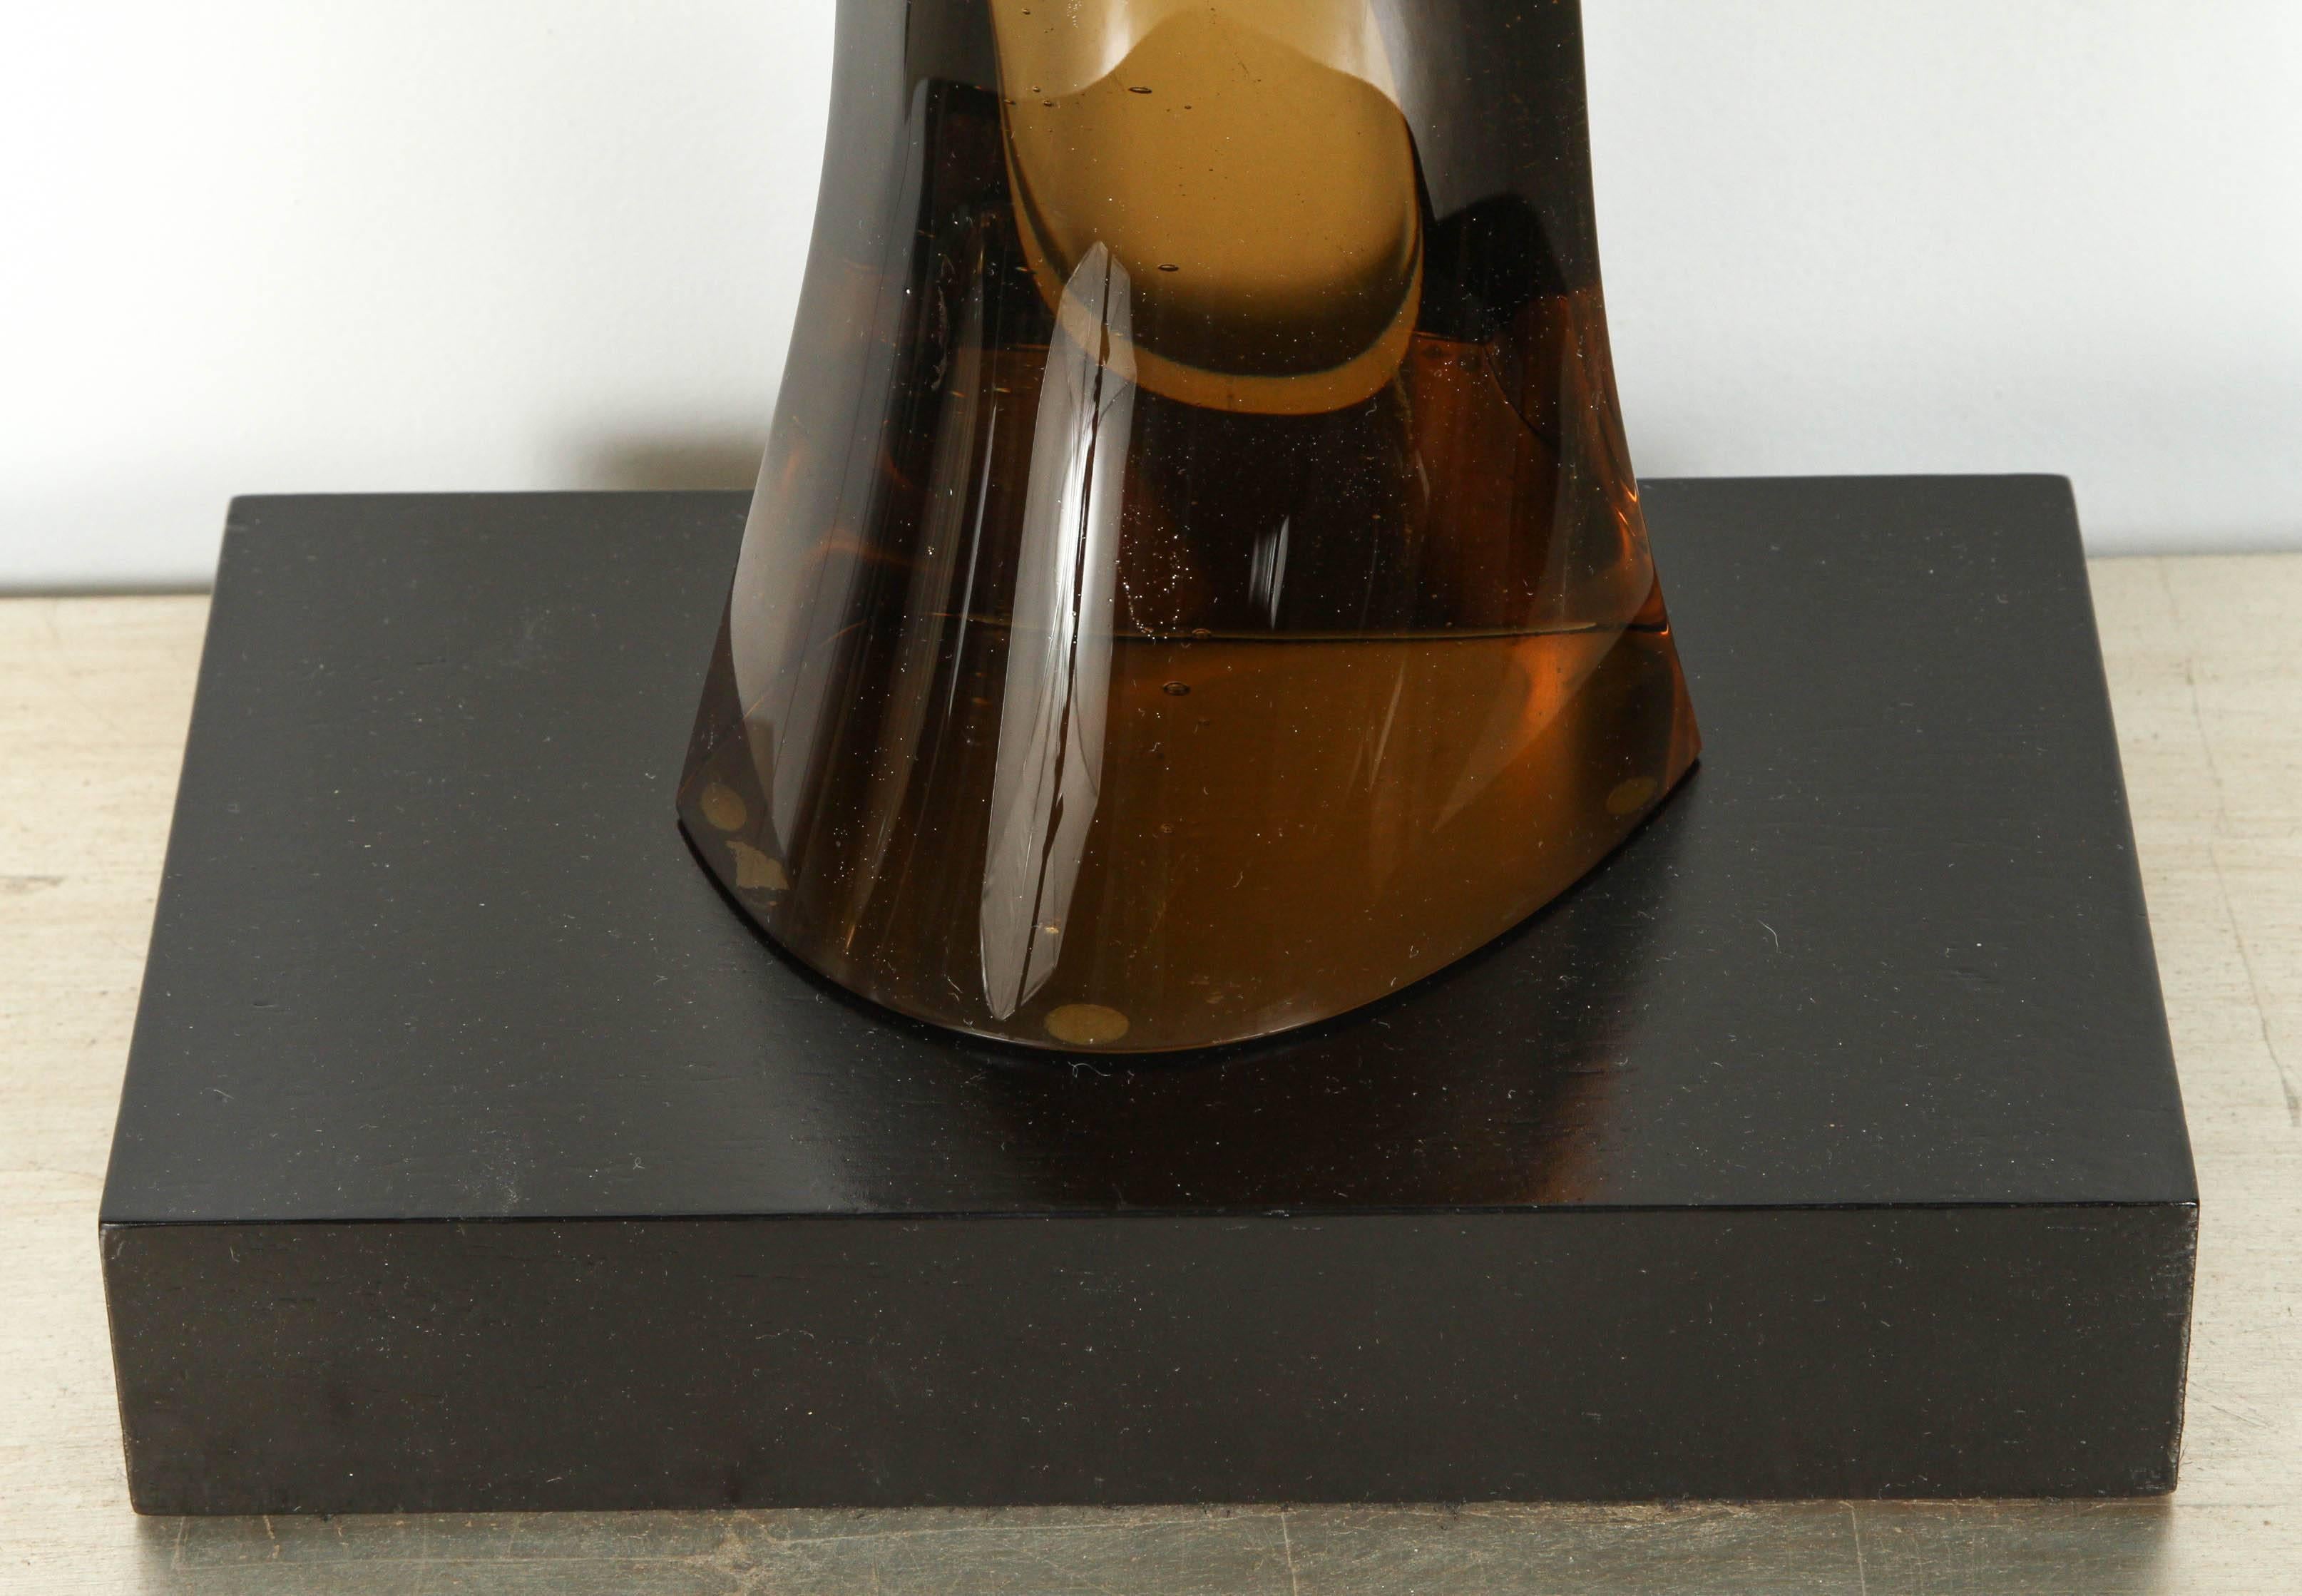 Sleek 1970s smoked glass sculpture set on a black wooden base. 
The smooth glass undulates and tapers up from the base. It fades from a dark amber to nearly clear at the top.